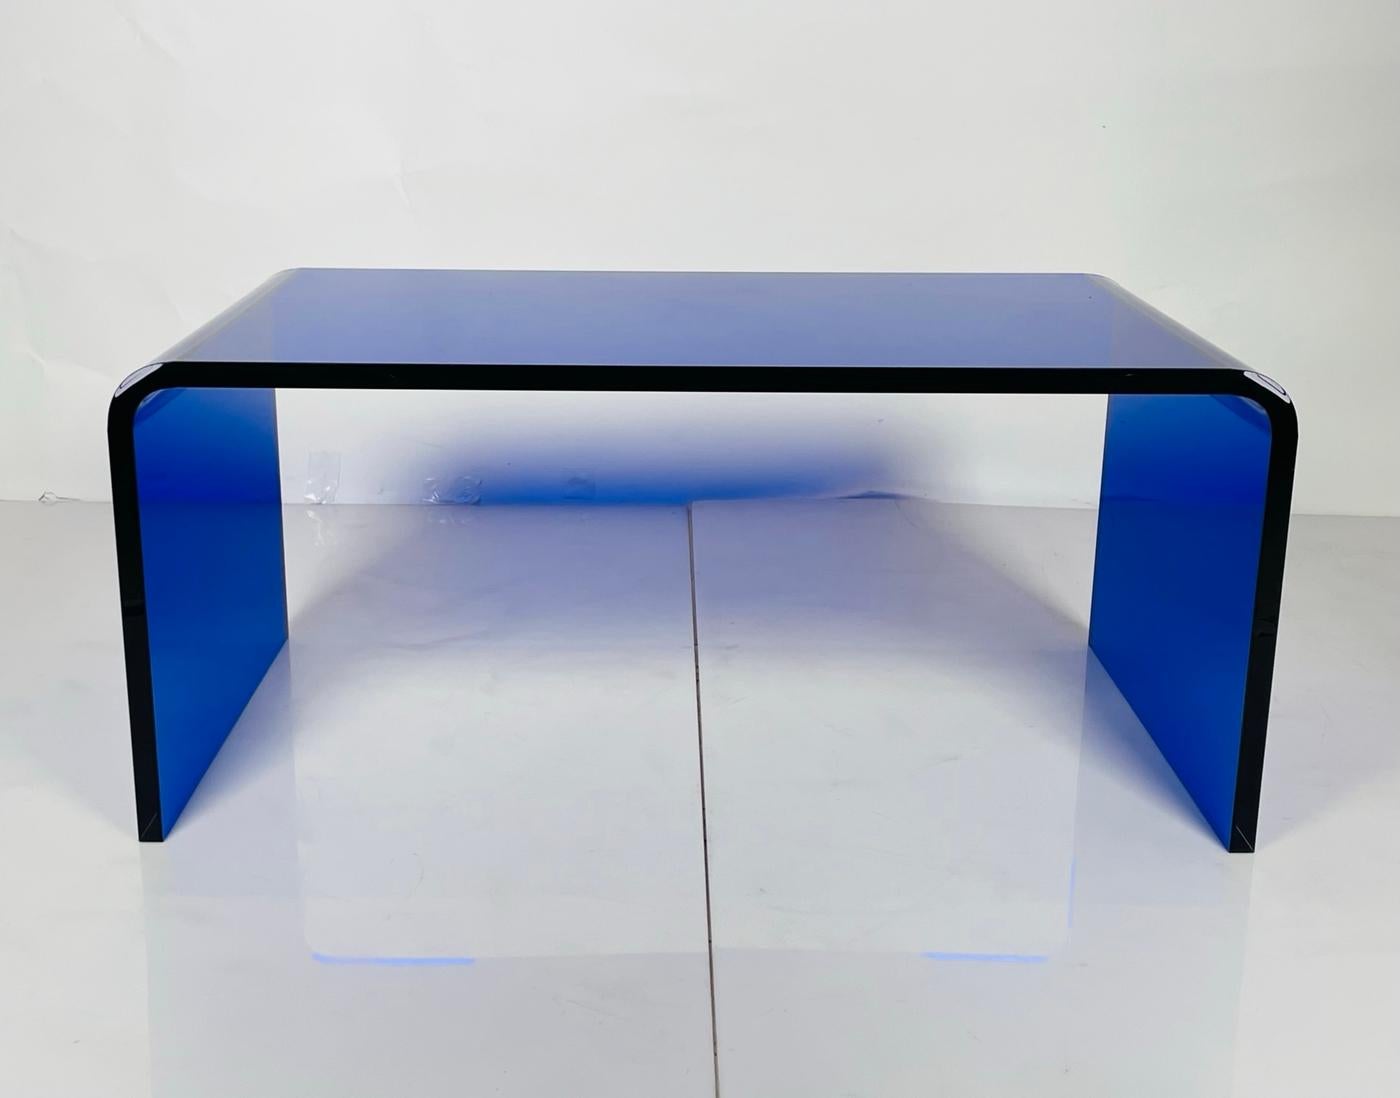 Contemporary Lucite Coffee Table in Cobalt Blue by Cain Modern, USA 2023 For Sale